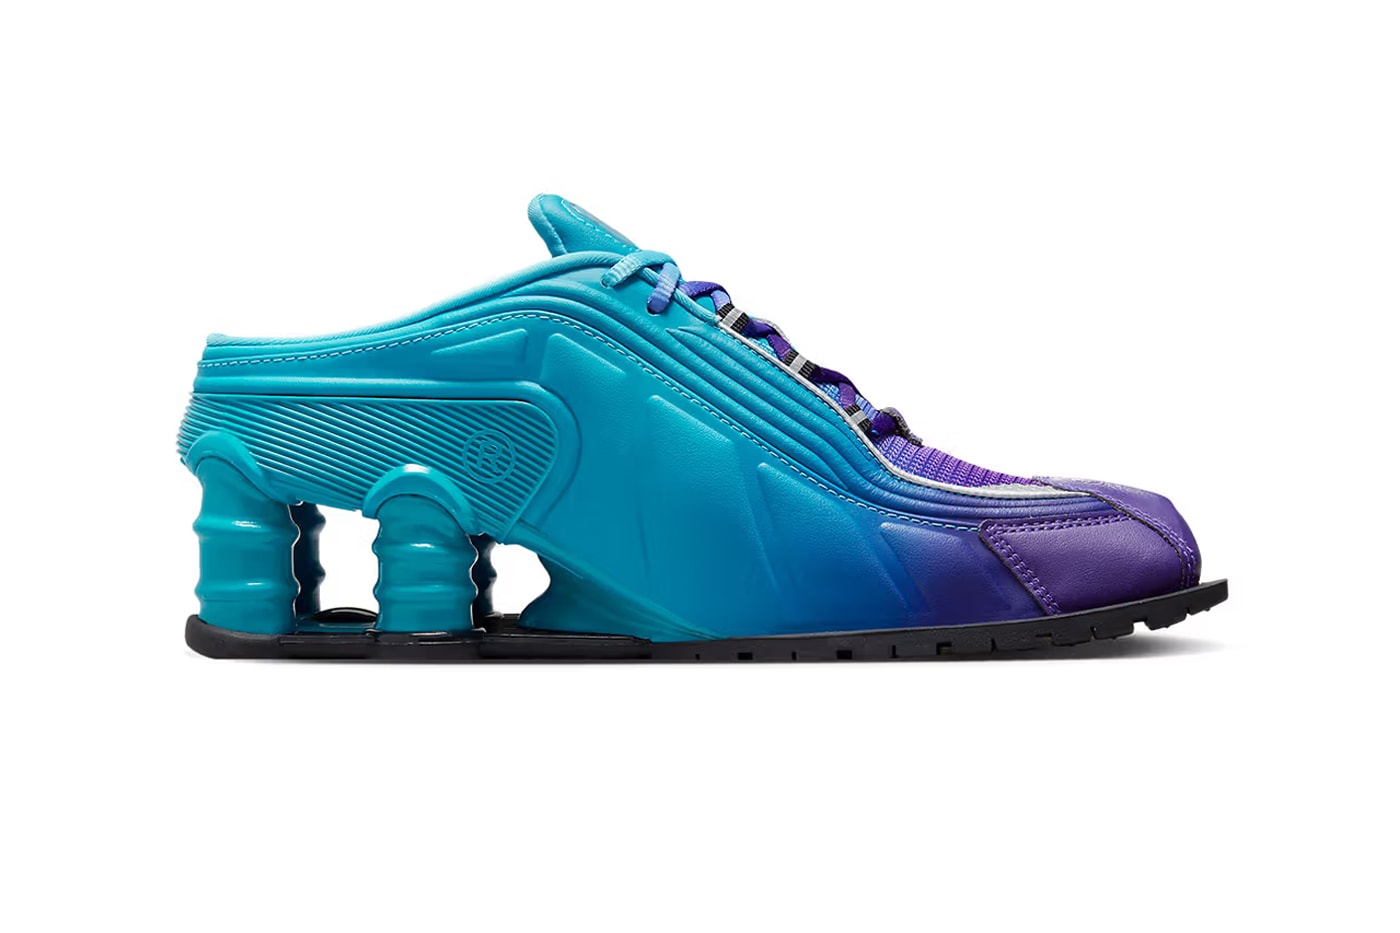 The Martine Rose x Nike Football collection is dropping this month